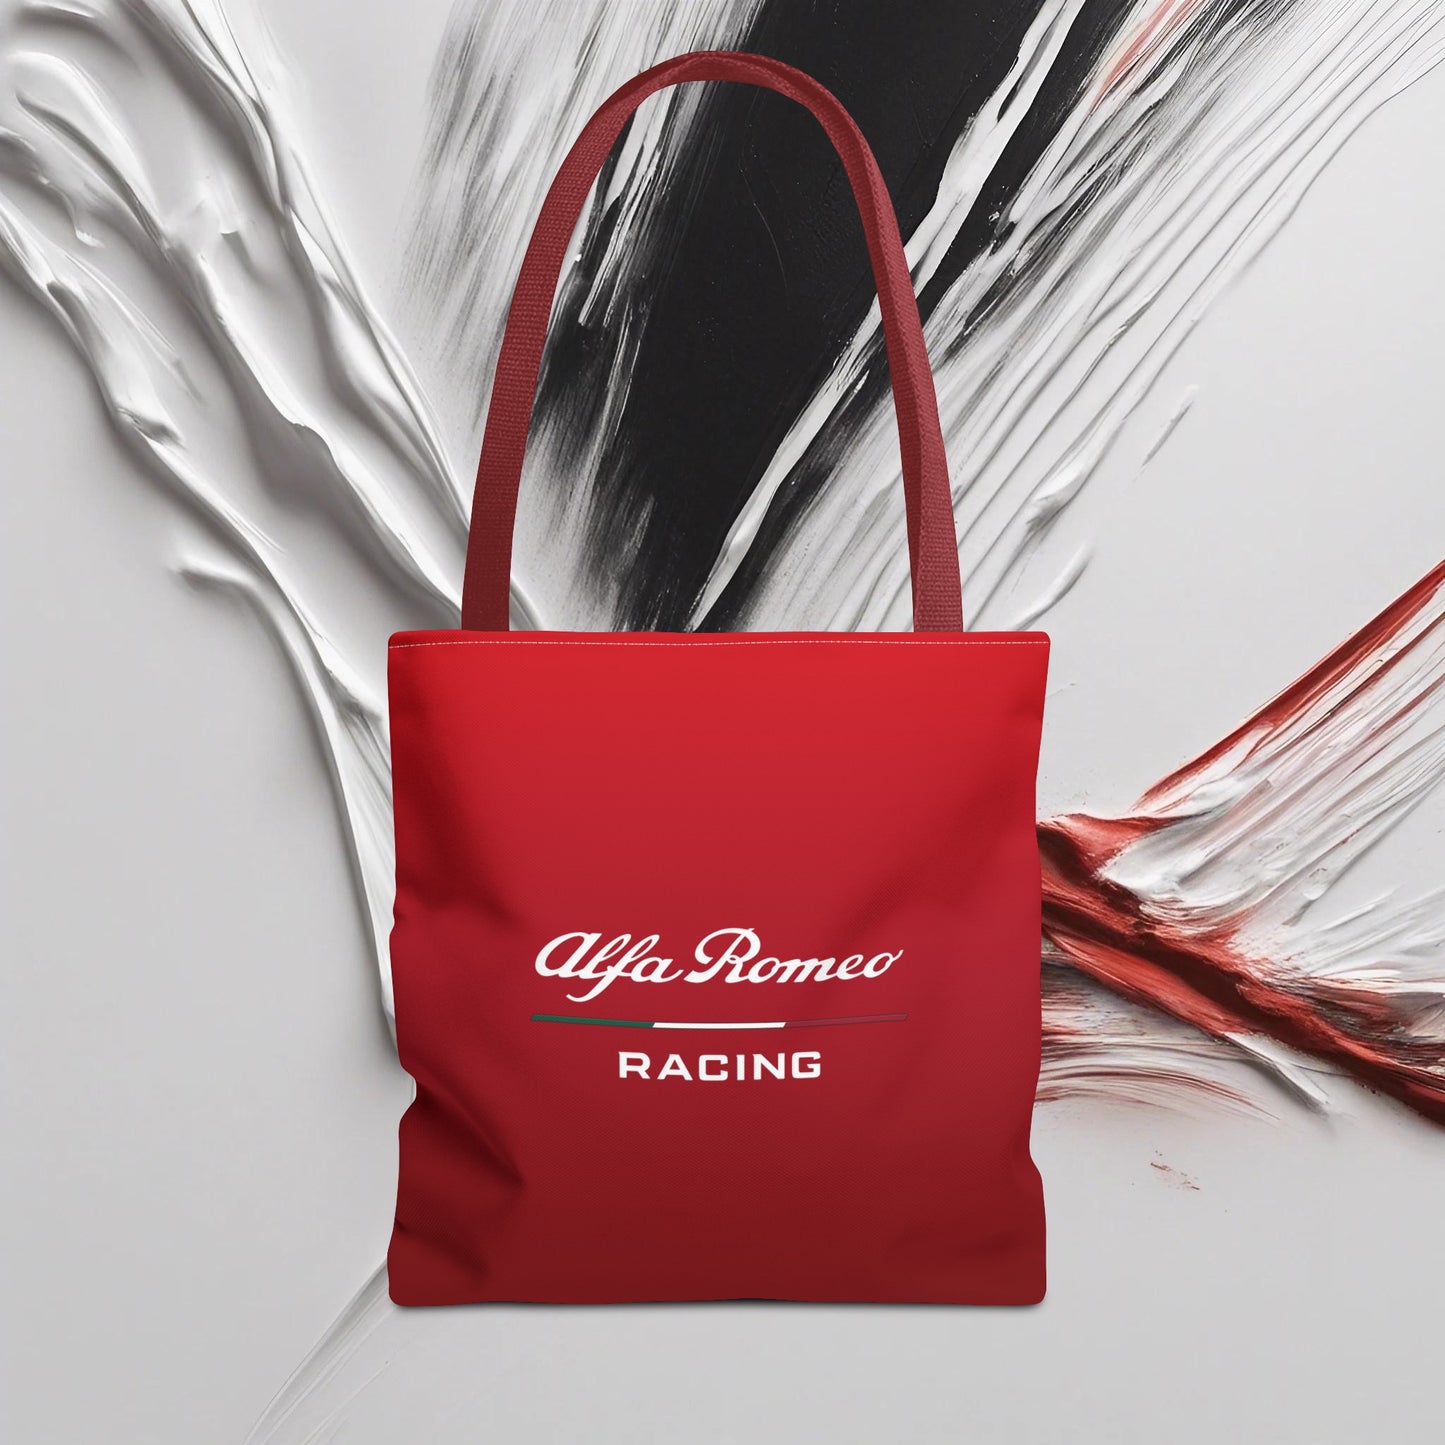 Alfa Romeo Racing Tote Bag - Rosso Etna, Durable Polyester, Multiple Sizes